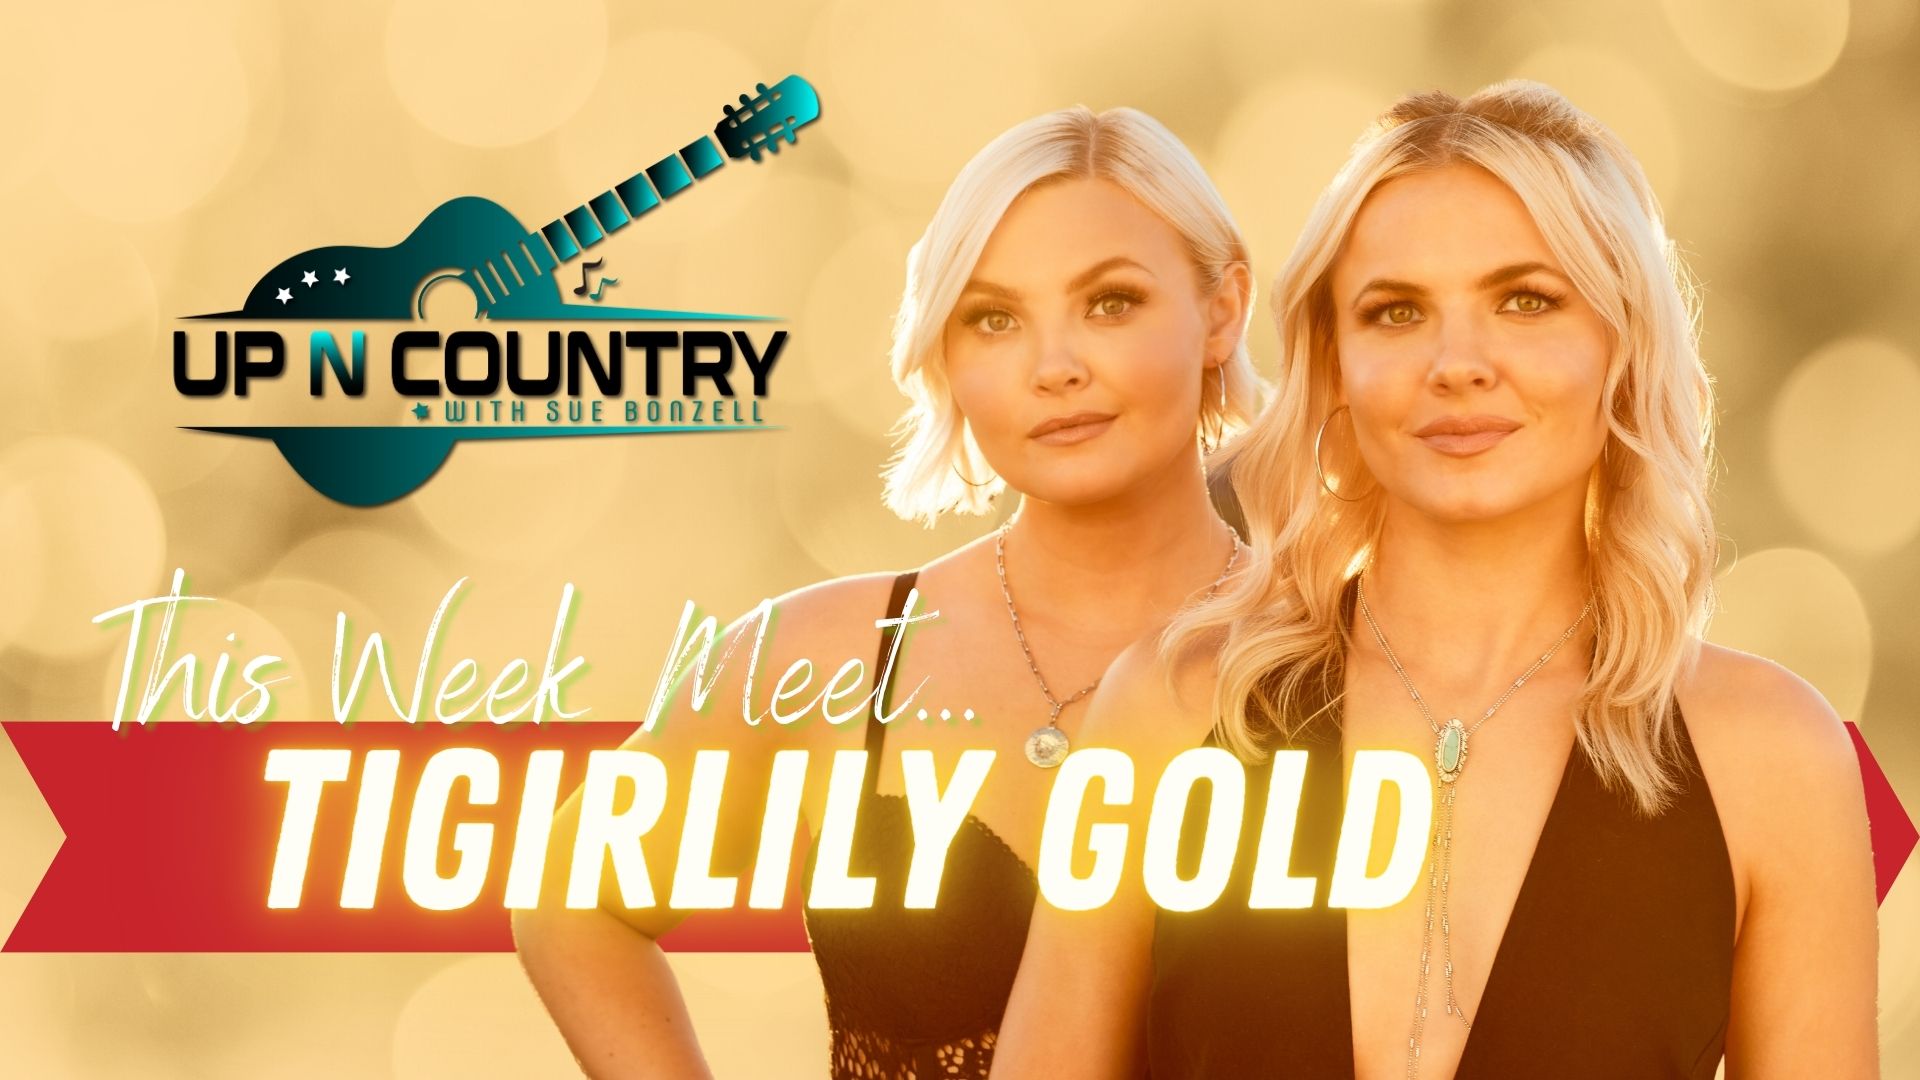 Meet Tigirlily Gold Up N Country